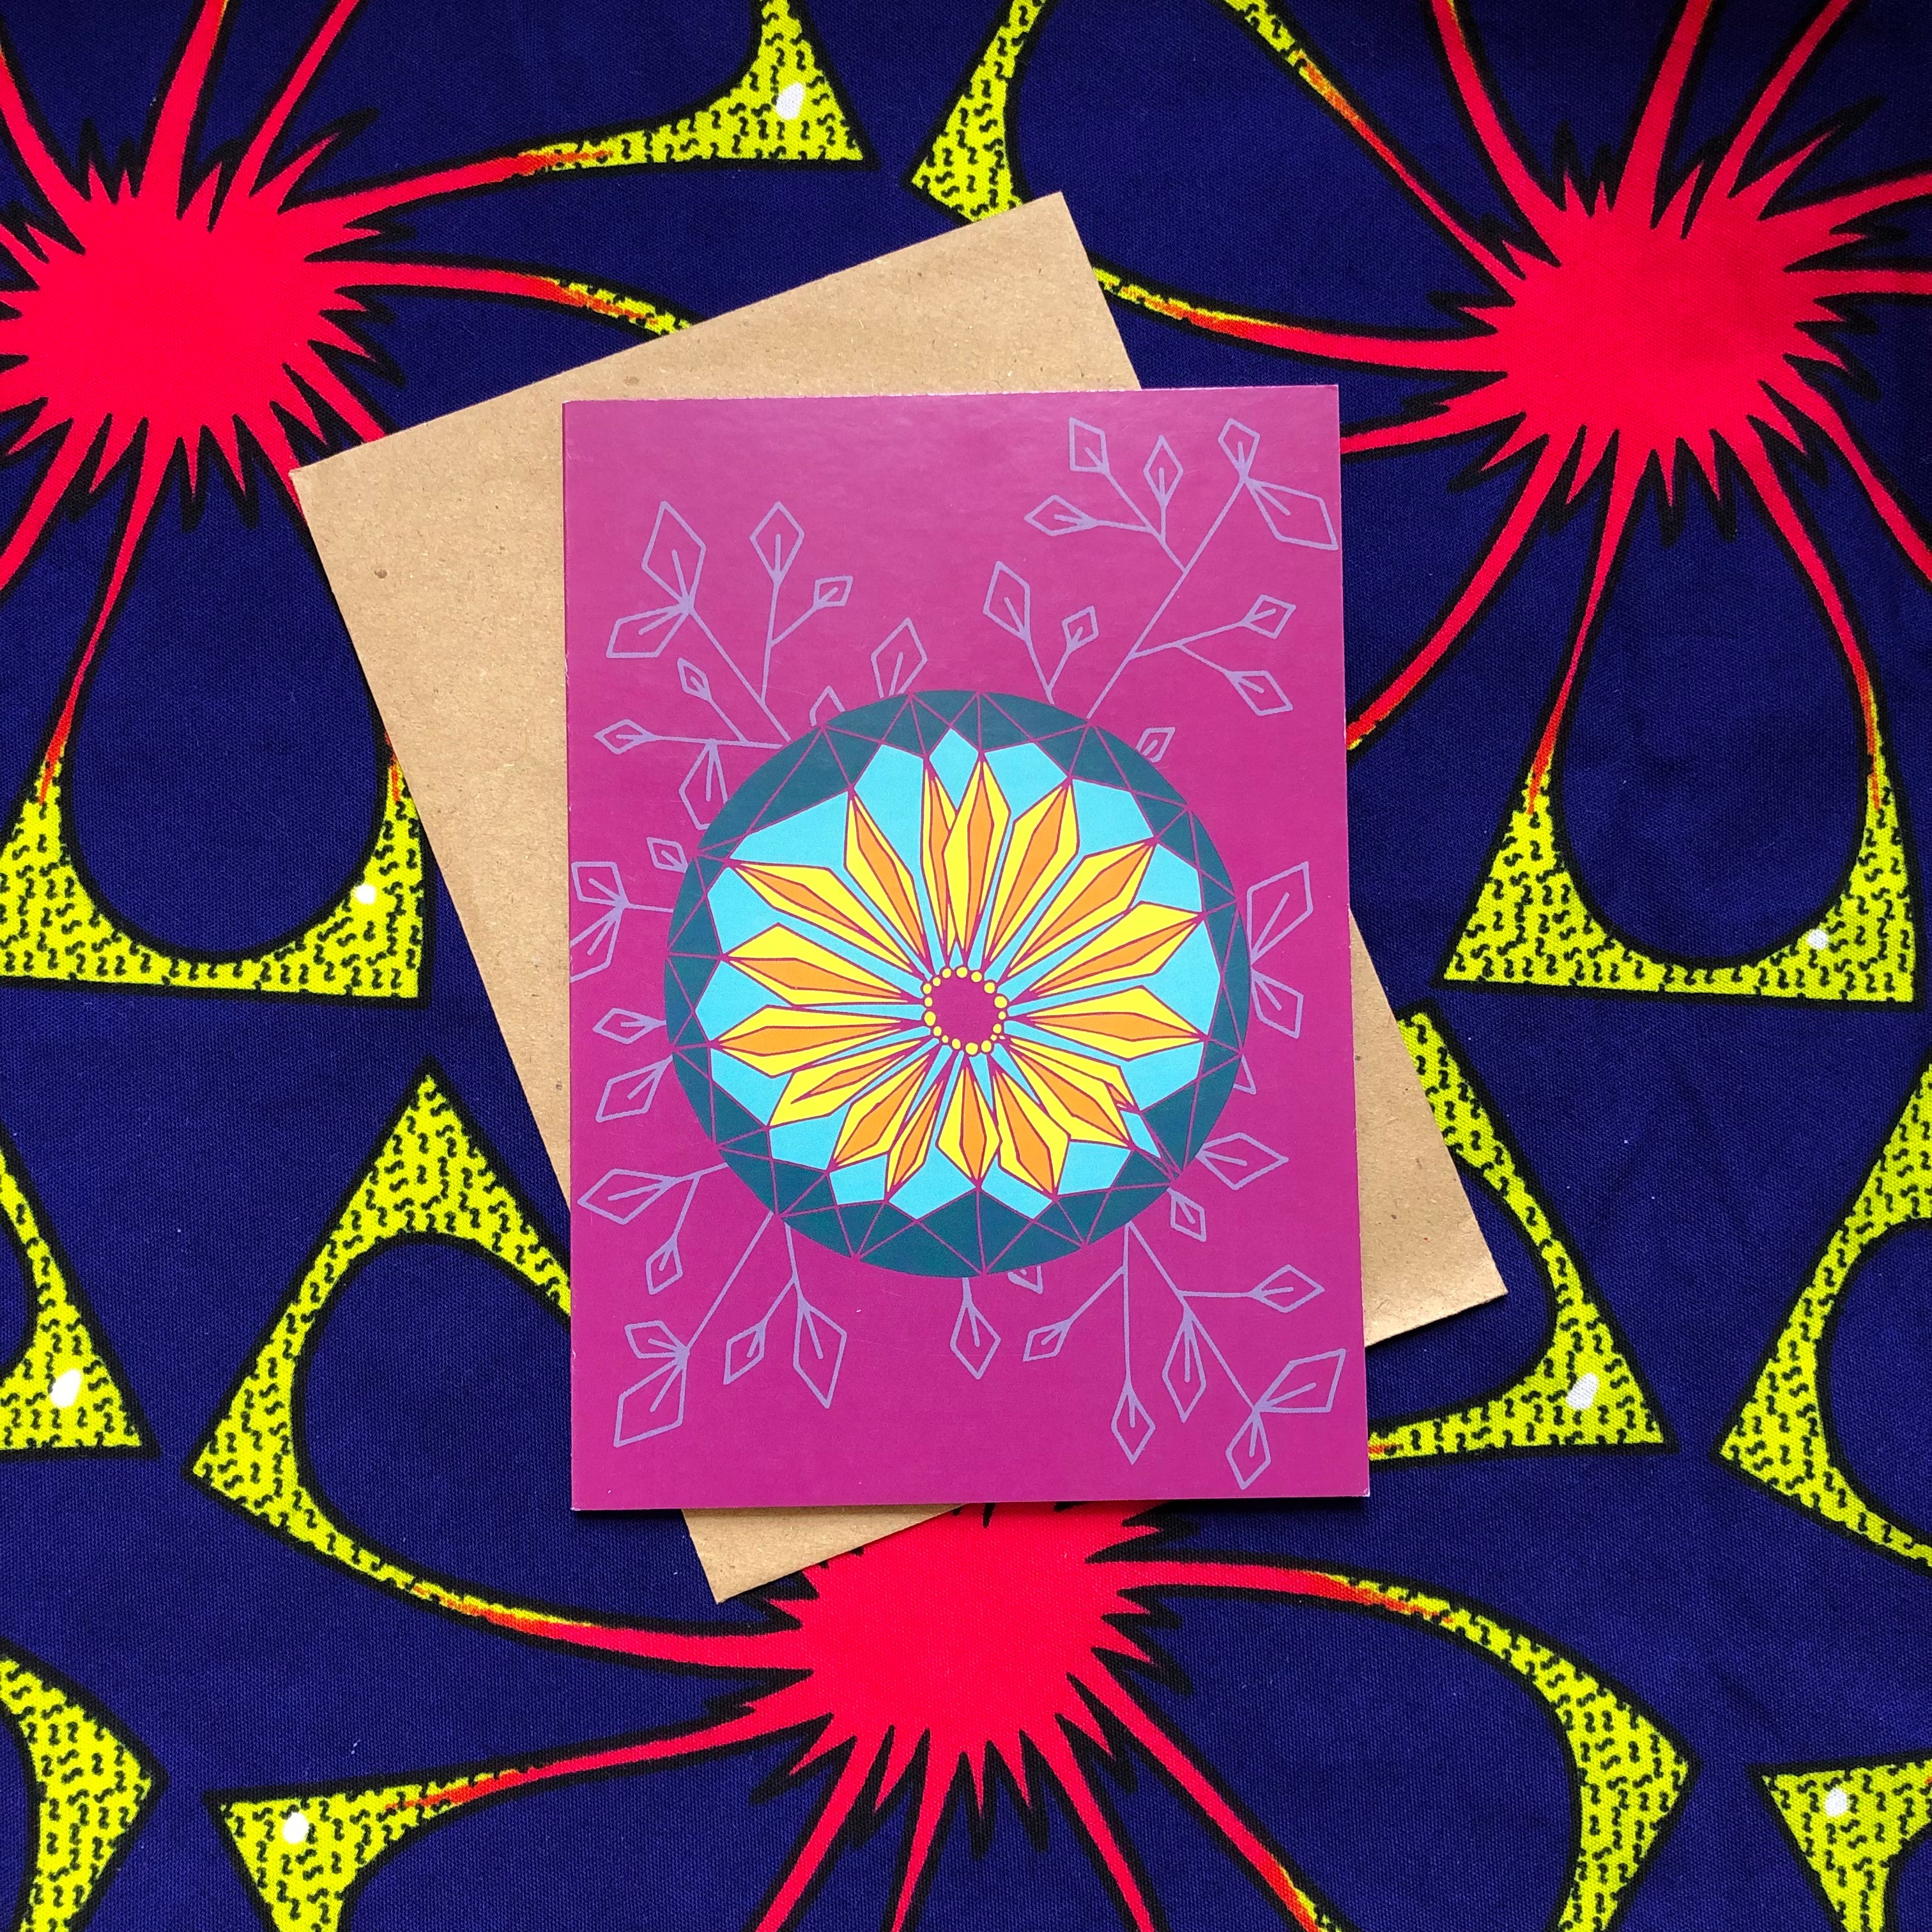 Purple greeting card with geometric yellow and blue design.